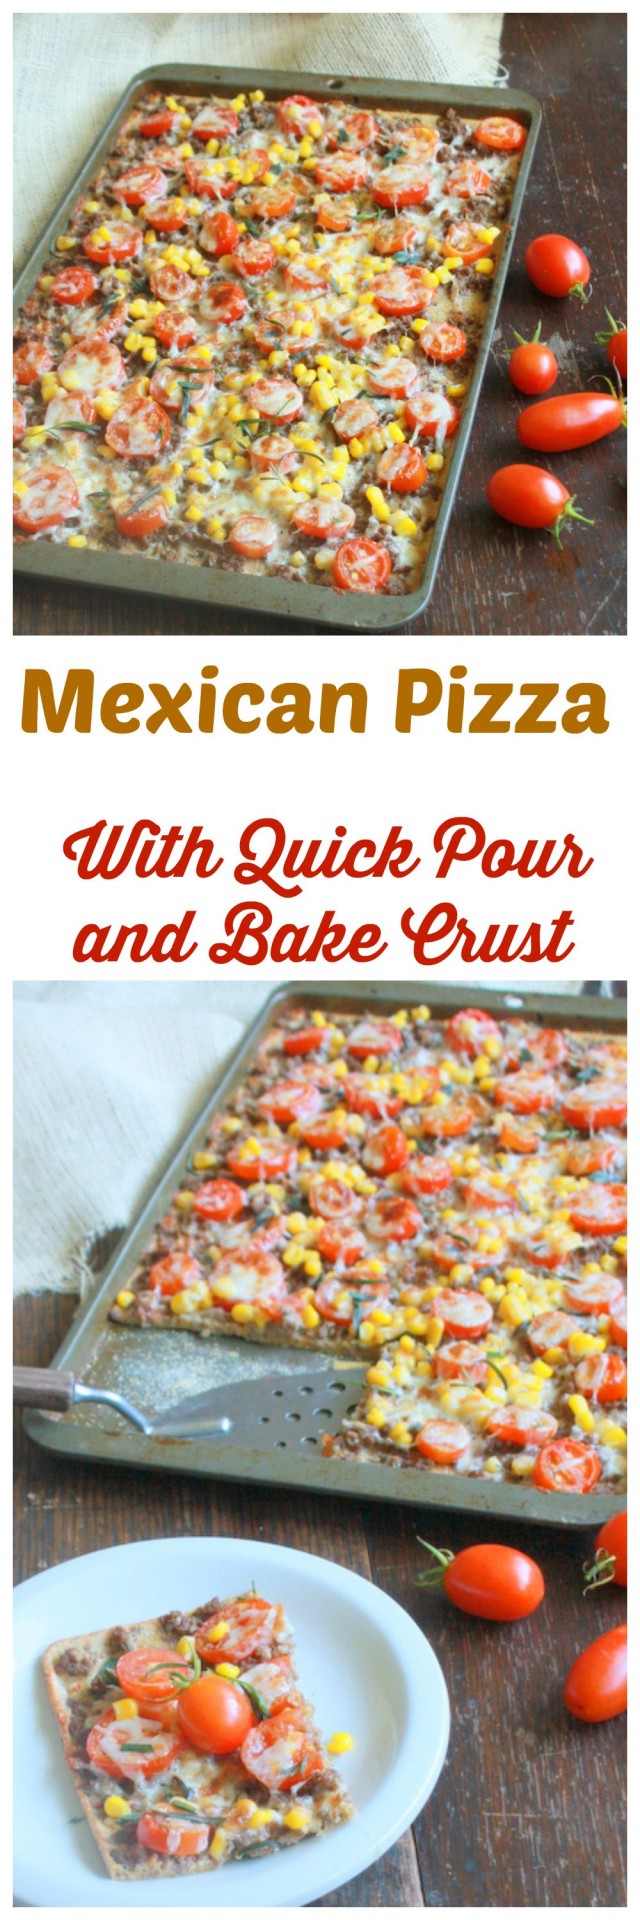 Homemade pizza crust in 3 minutes: Mexican Pizza with Quick Pour and Bake Crust